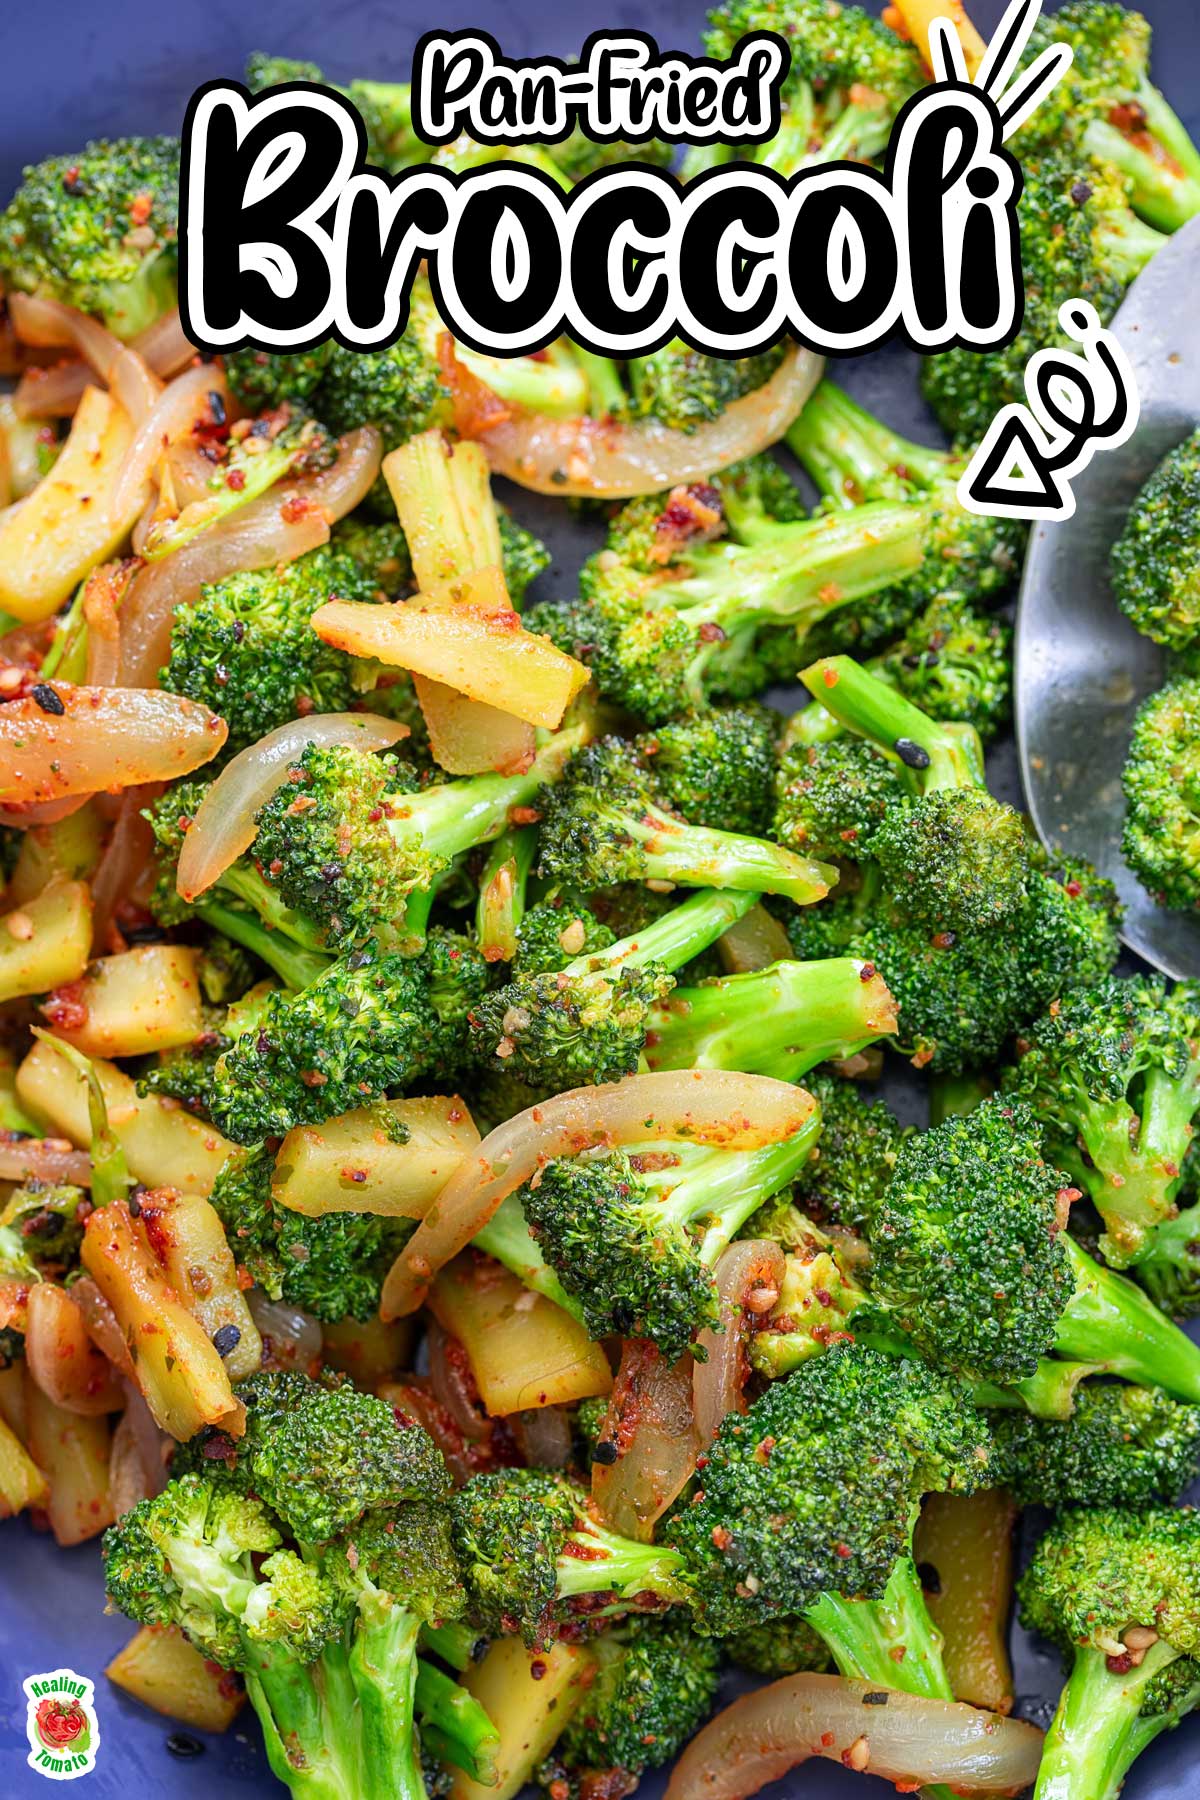 Top and closeup view of cooked broccoli and onions on a blue plate.